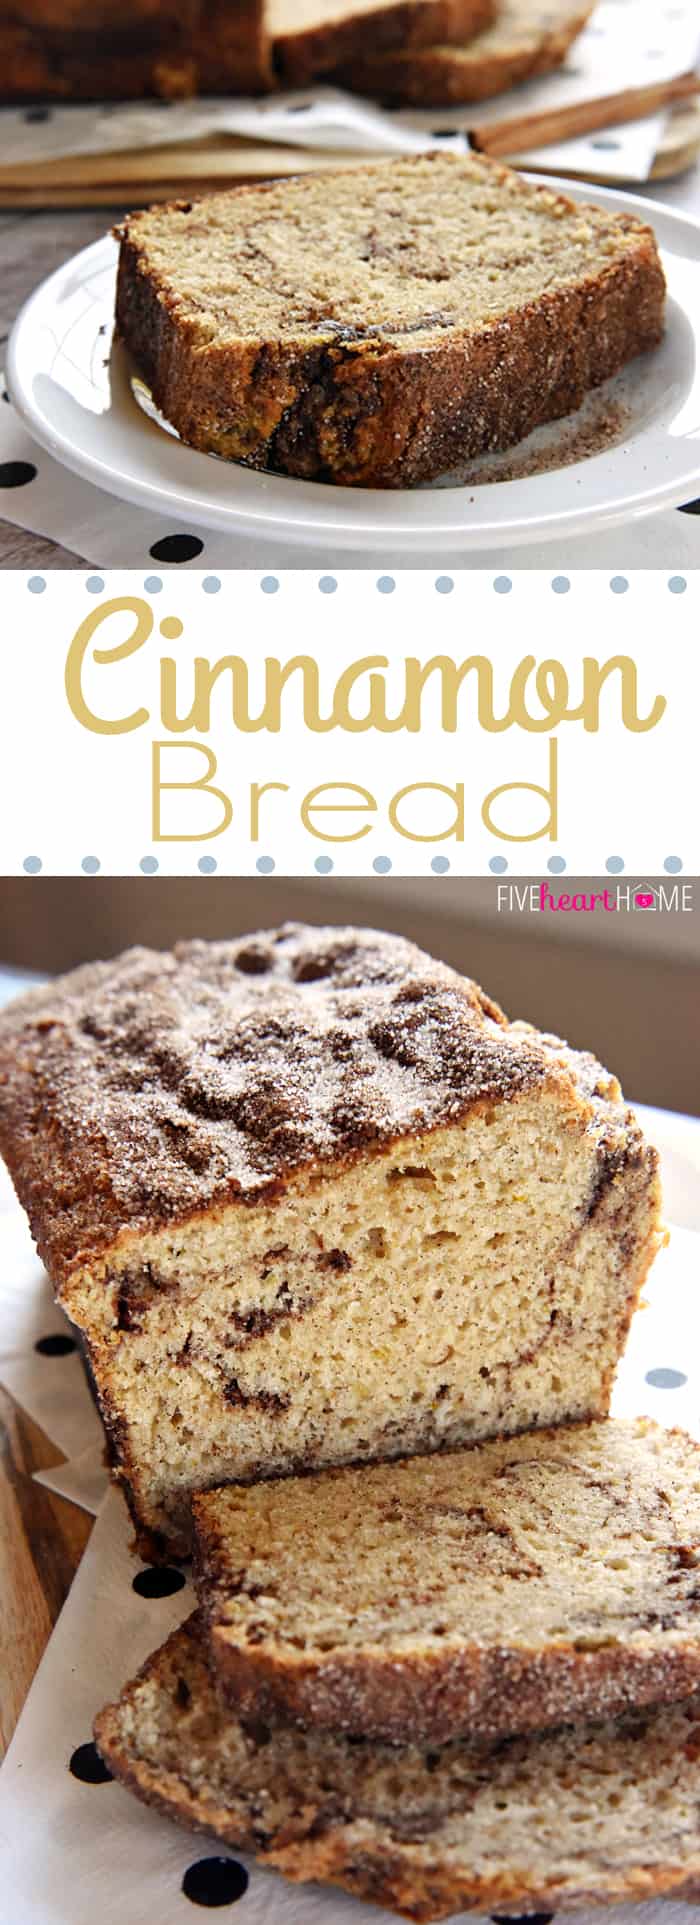 Cinnamon Bread, two-photo collage with text.